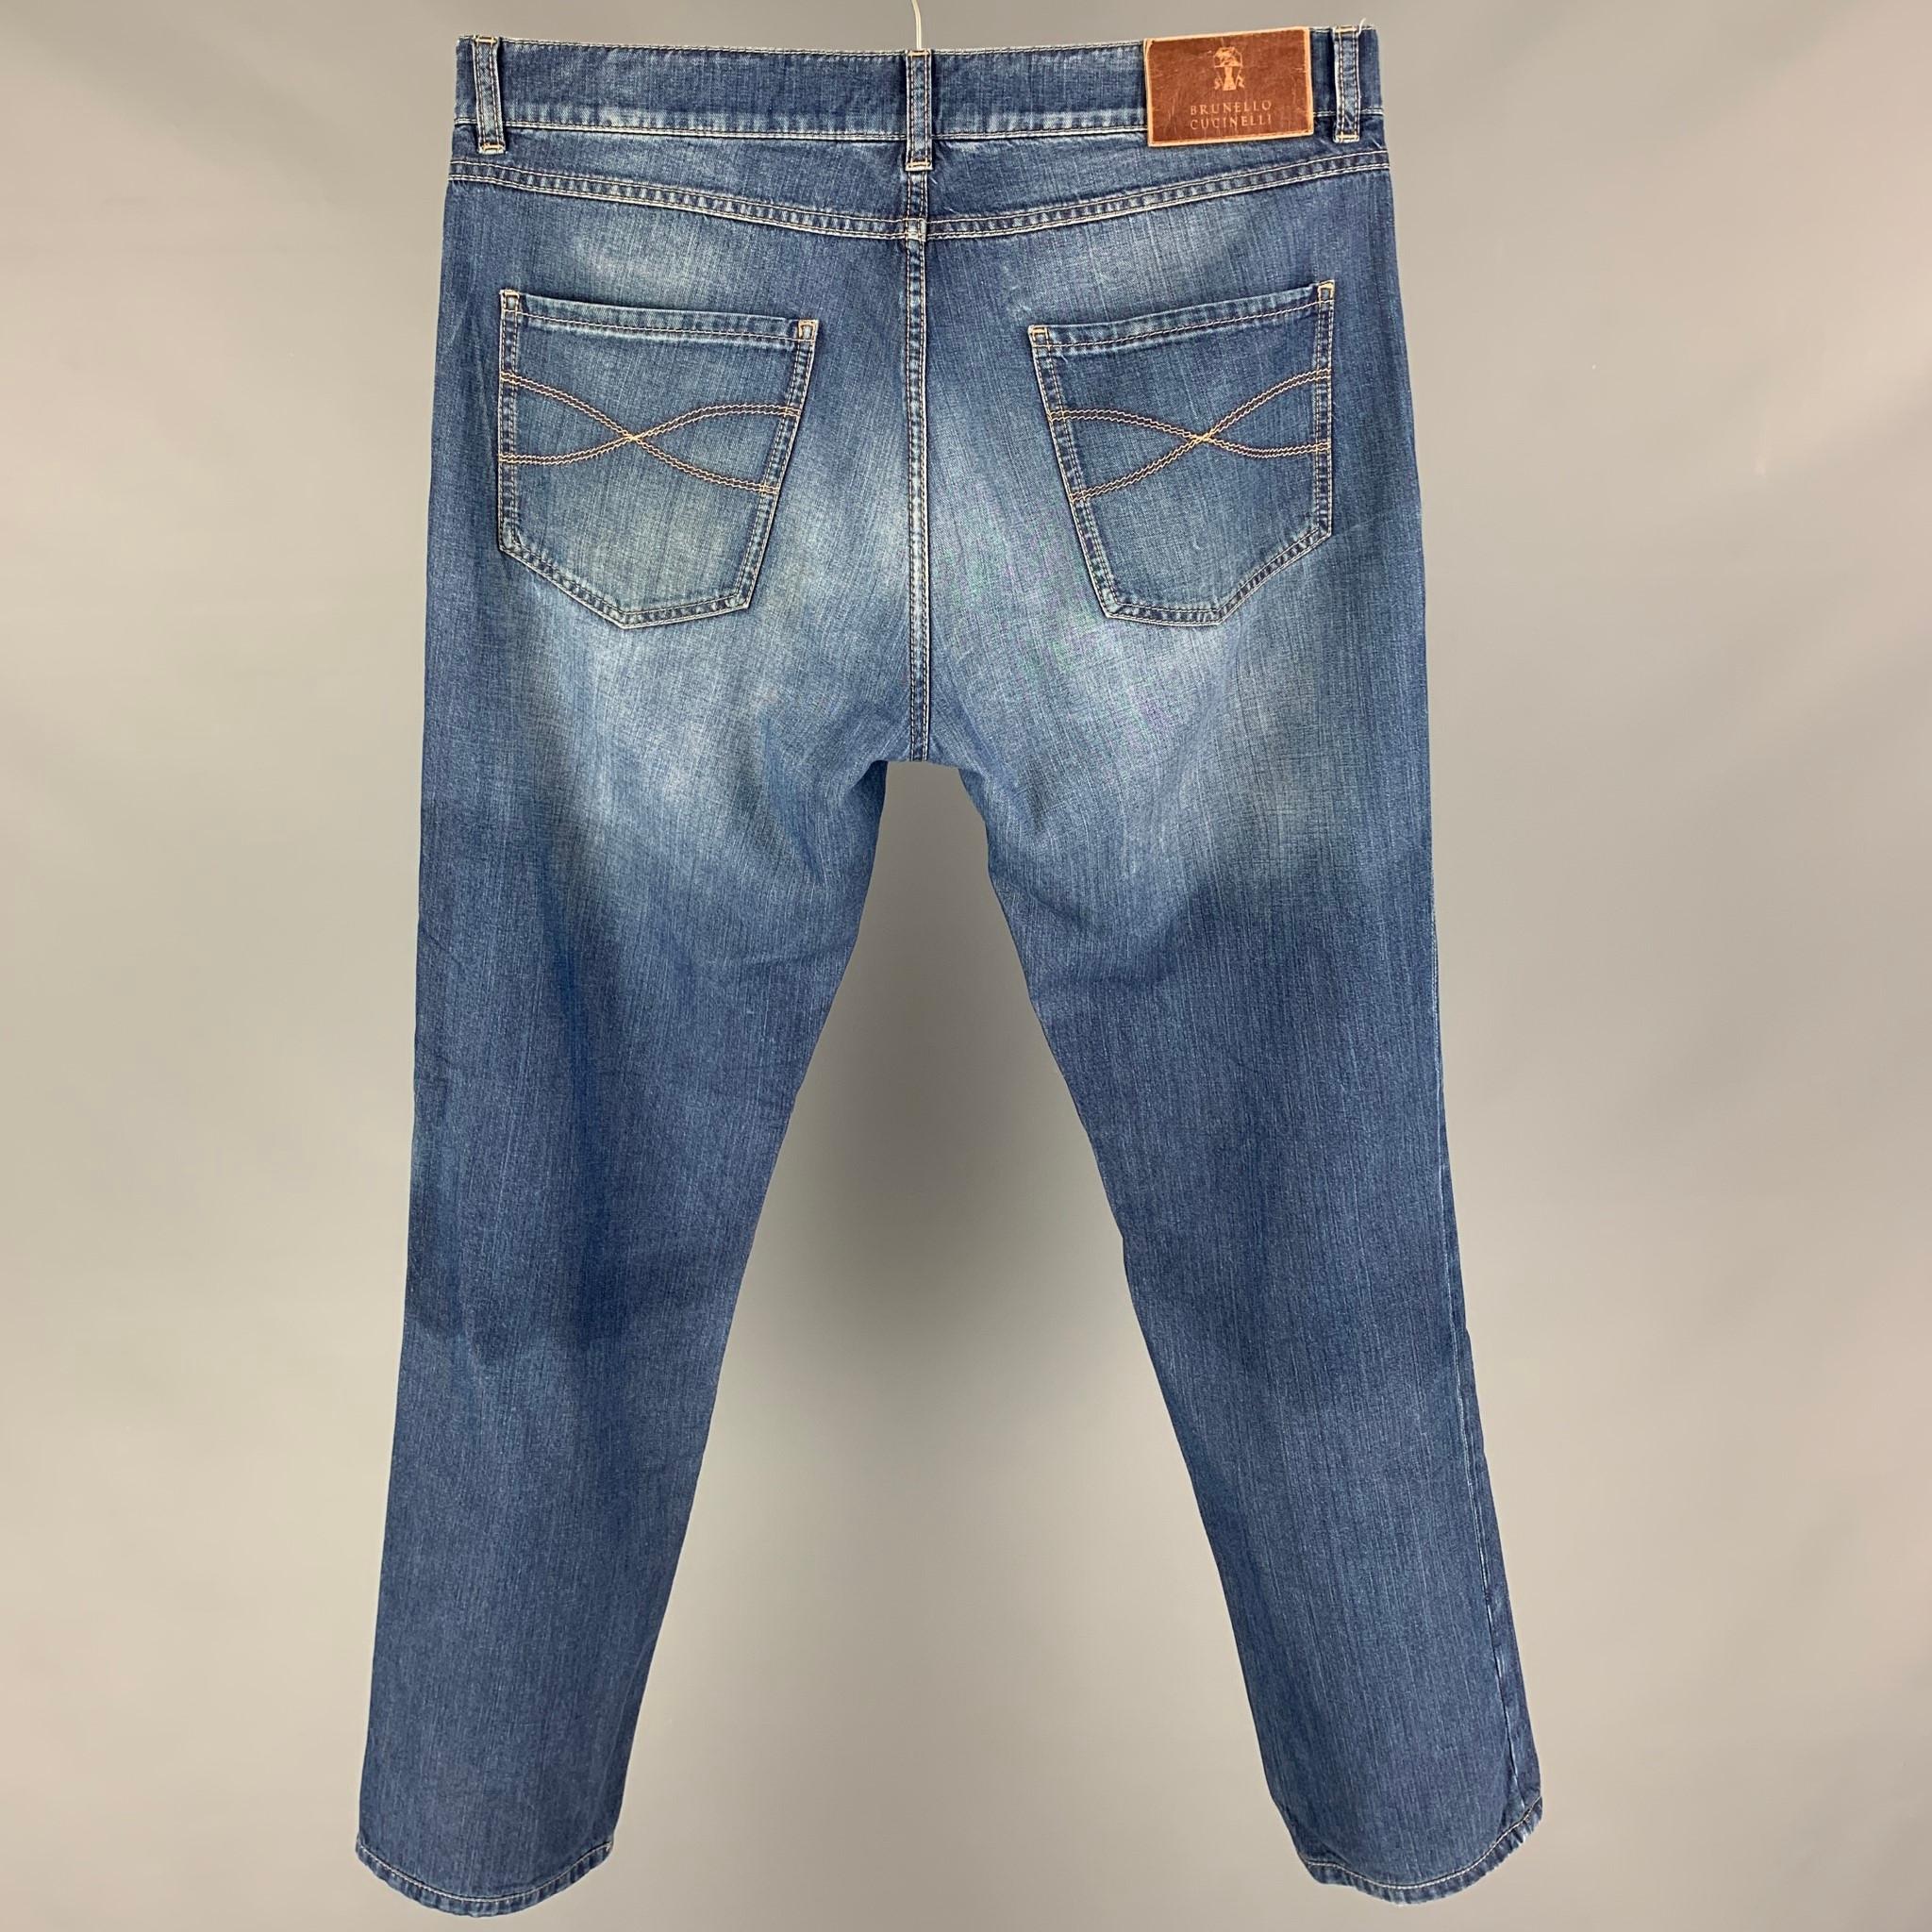 BRUNELLO CUCINELLI jeans comes in a blue washed cotton featuring a slim fit, contrast stitching, and a button fly closure. Made in Italy. 

Good Pre-Owned Condition. Minor discoloration at top. As-is.
Marked: 50
Original Retail Price: